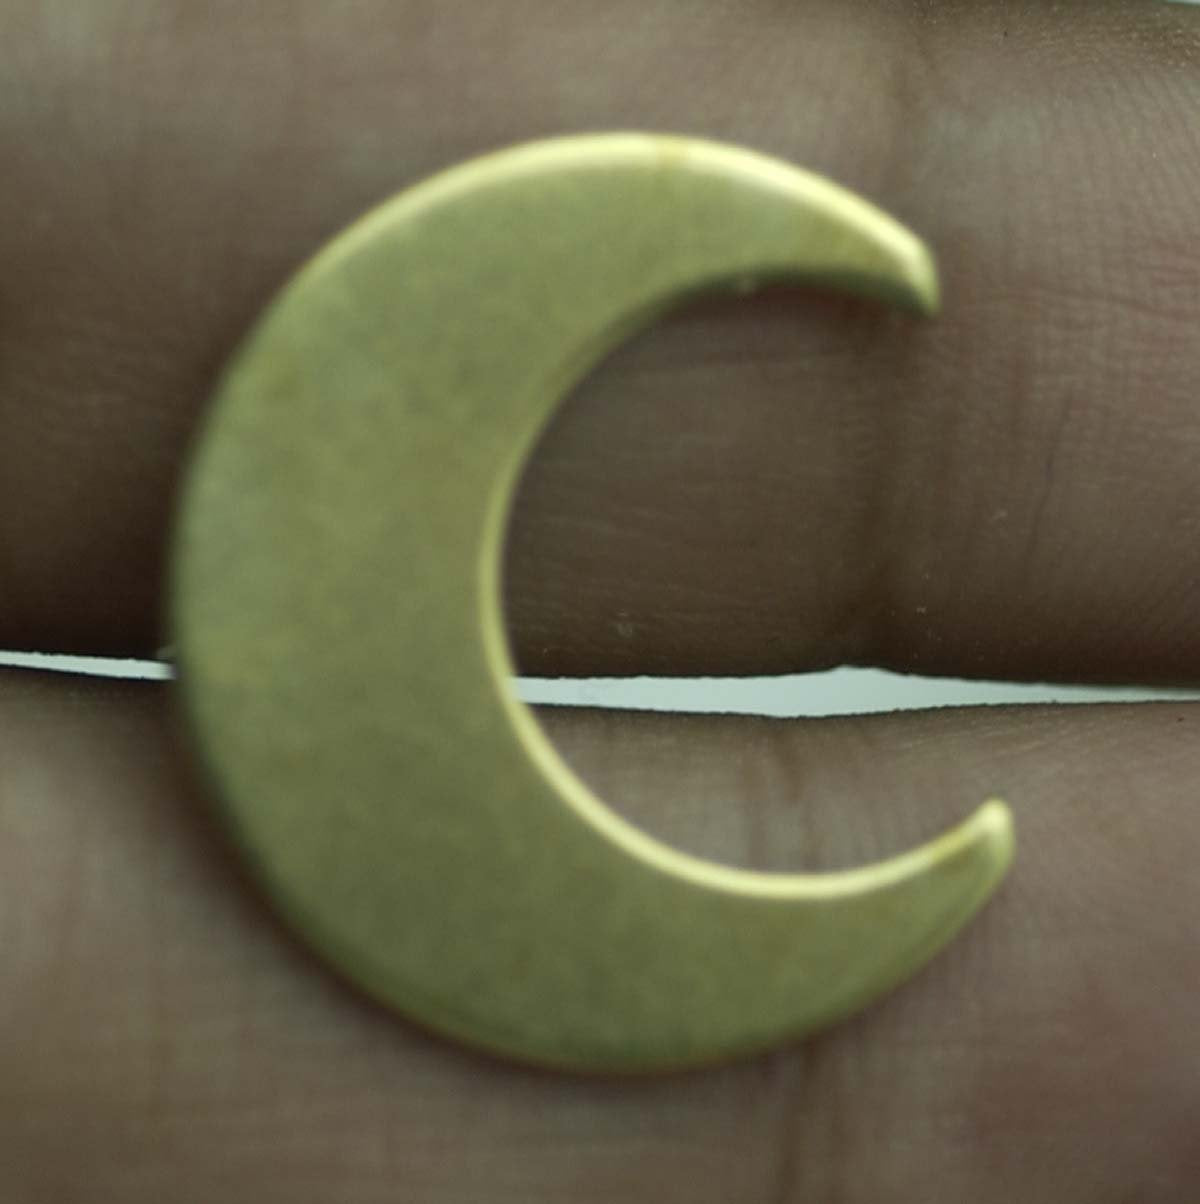 Bronze or Brass Moon Cheshire 20mm x 17.6mm 20g for Blanks for Stamping Texturing Soldering Shape Charms Jewelry Making Blank - 4 pieces